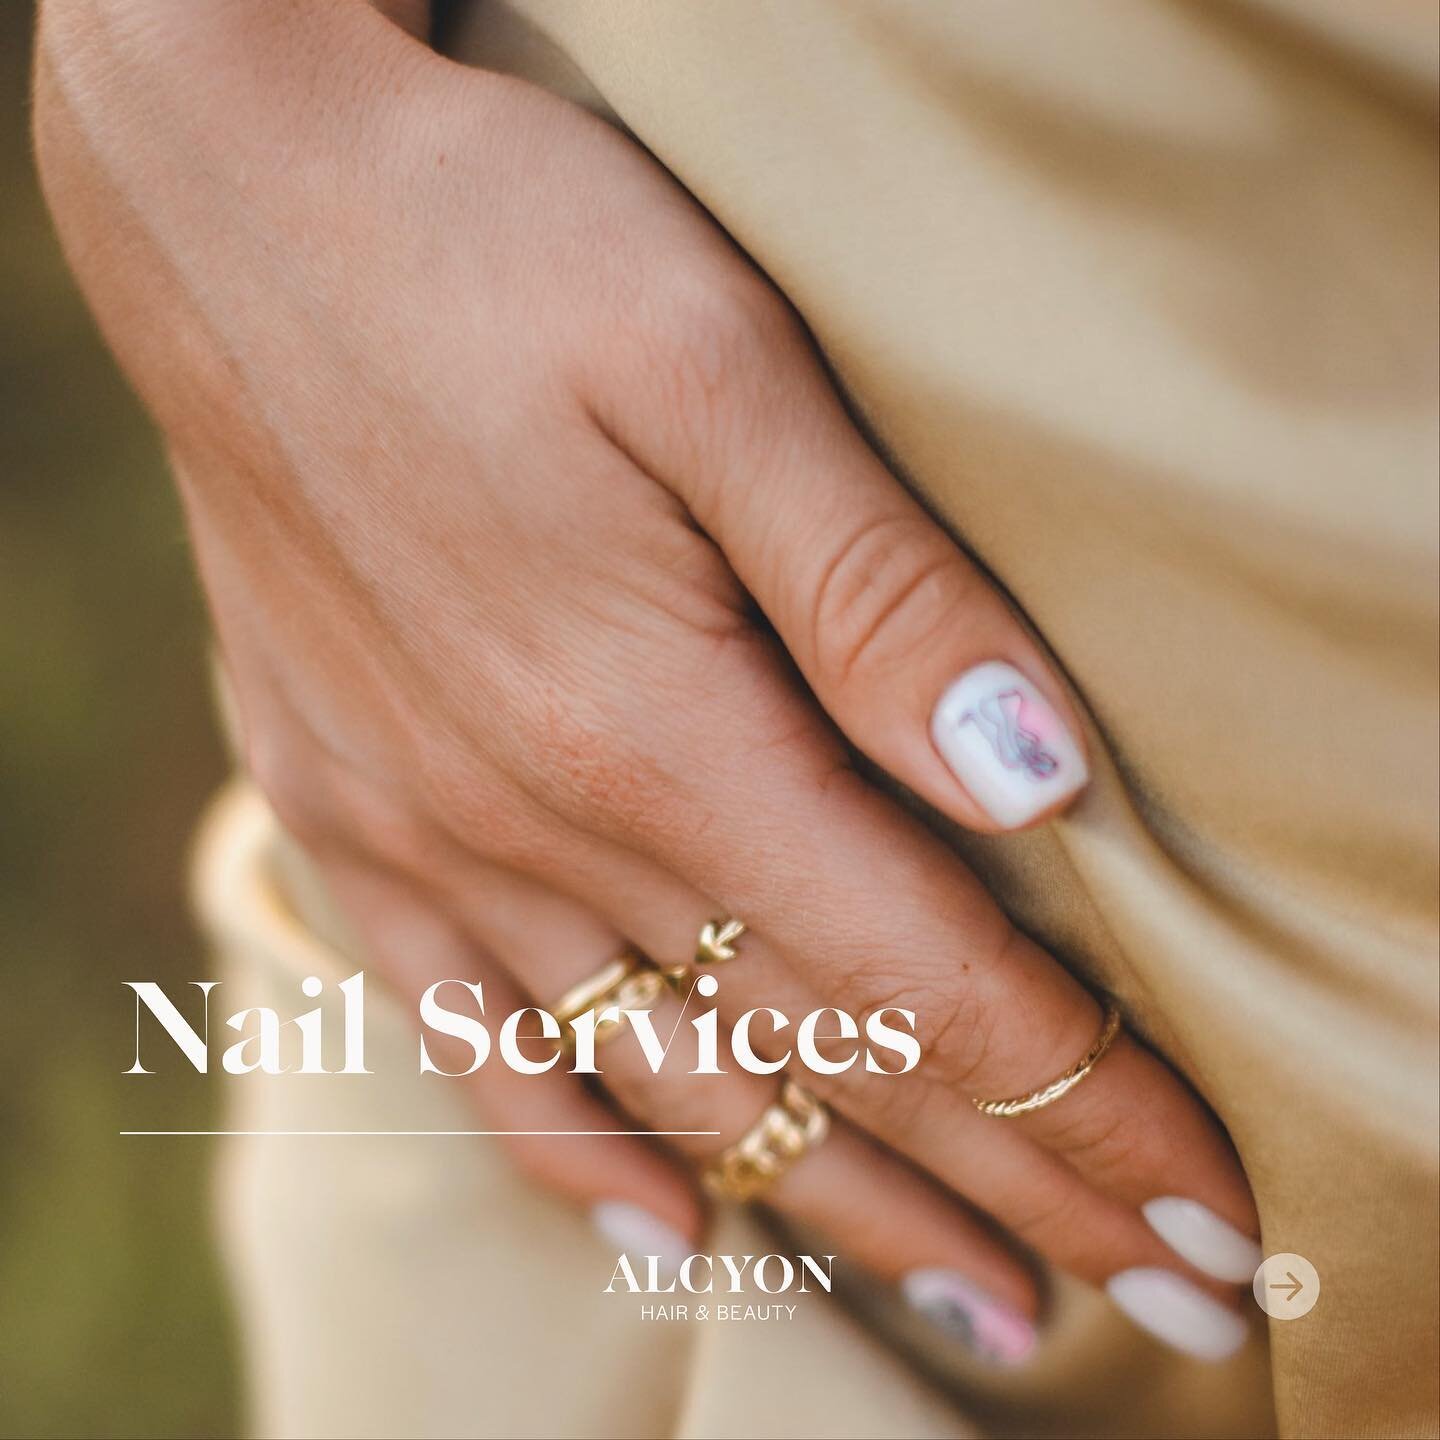 Nailed it! 💅🏼 Come for the manicures, stay for the relaxation. Alcyon Hair &amp; Beauty offers a range of services including gel nails, acrylics, and nail art. Book your appointment now and let us pamper you to perfection! 

To book call us on 0407